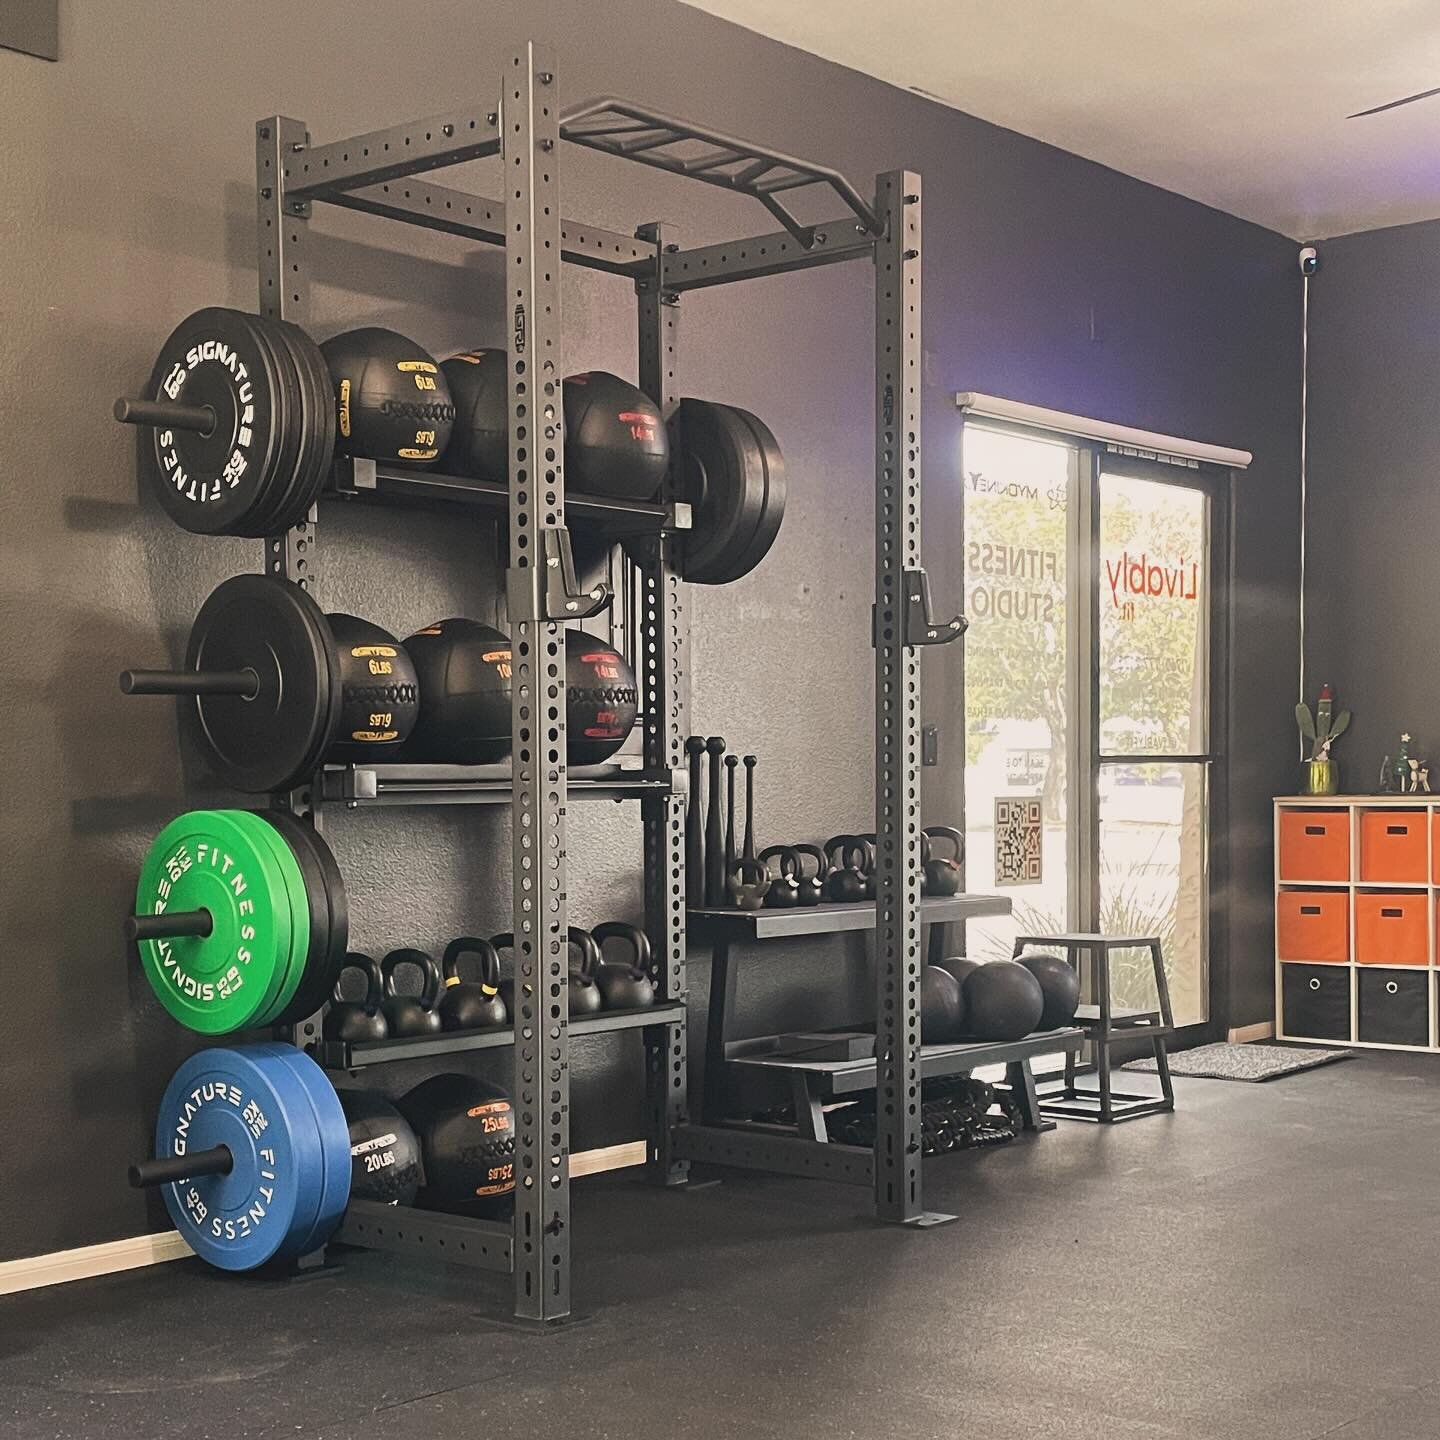 New power rack for the gym!

We make people STRONG here 💪

#privatestudio #fitnessforlife #strongereveryday #wetrainhere #healthylifestyle #palmdesert #localgym